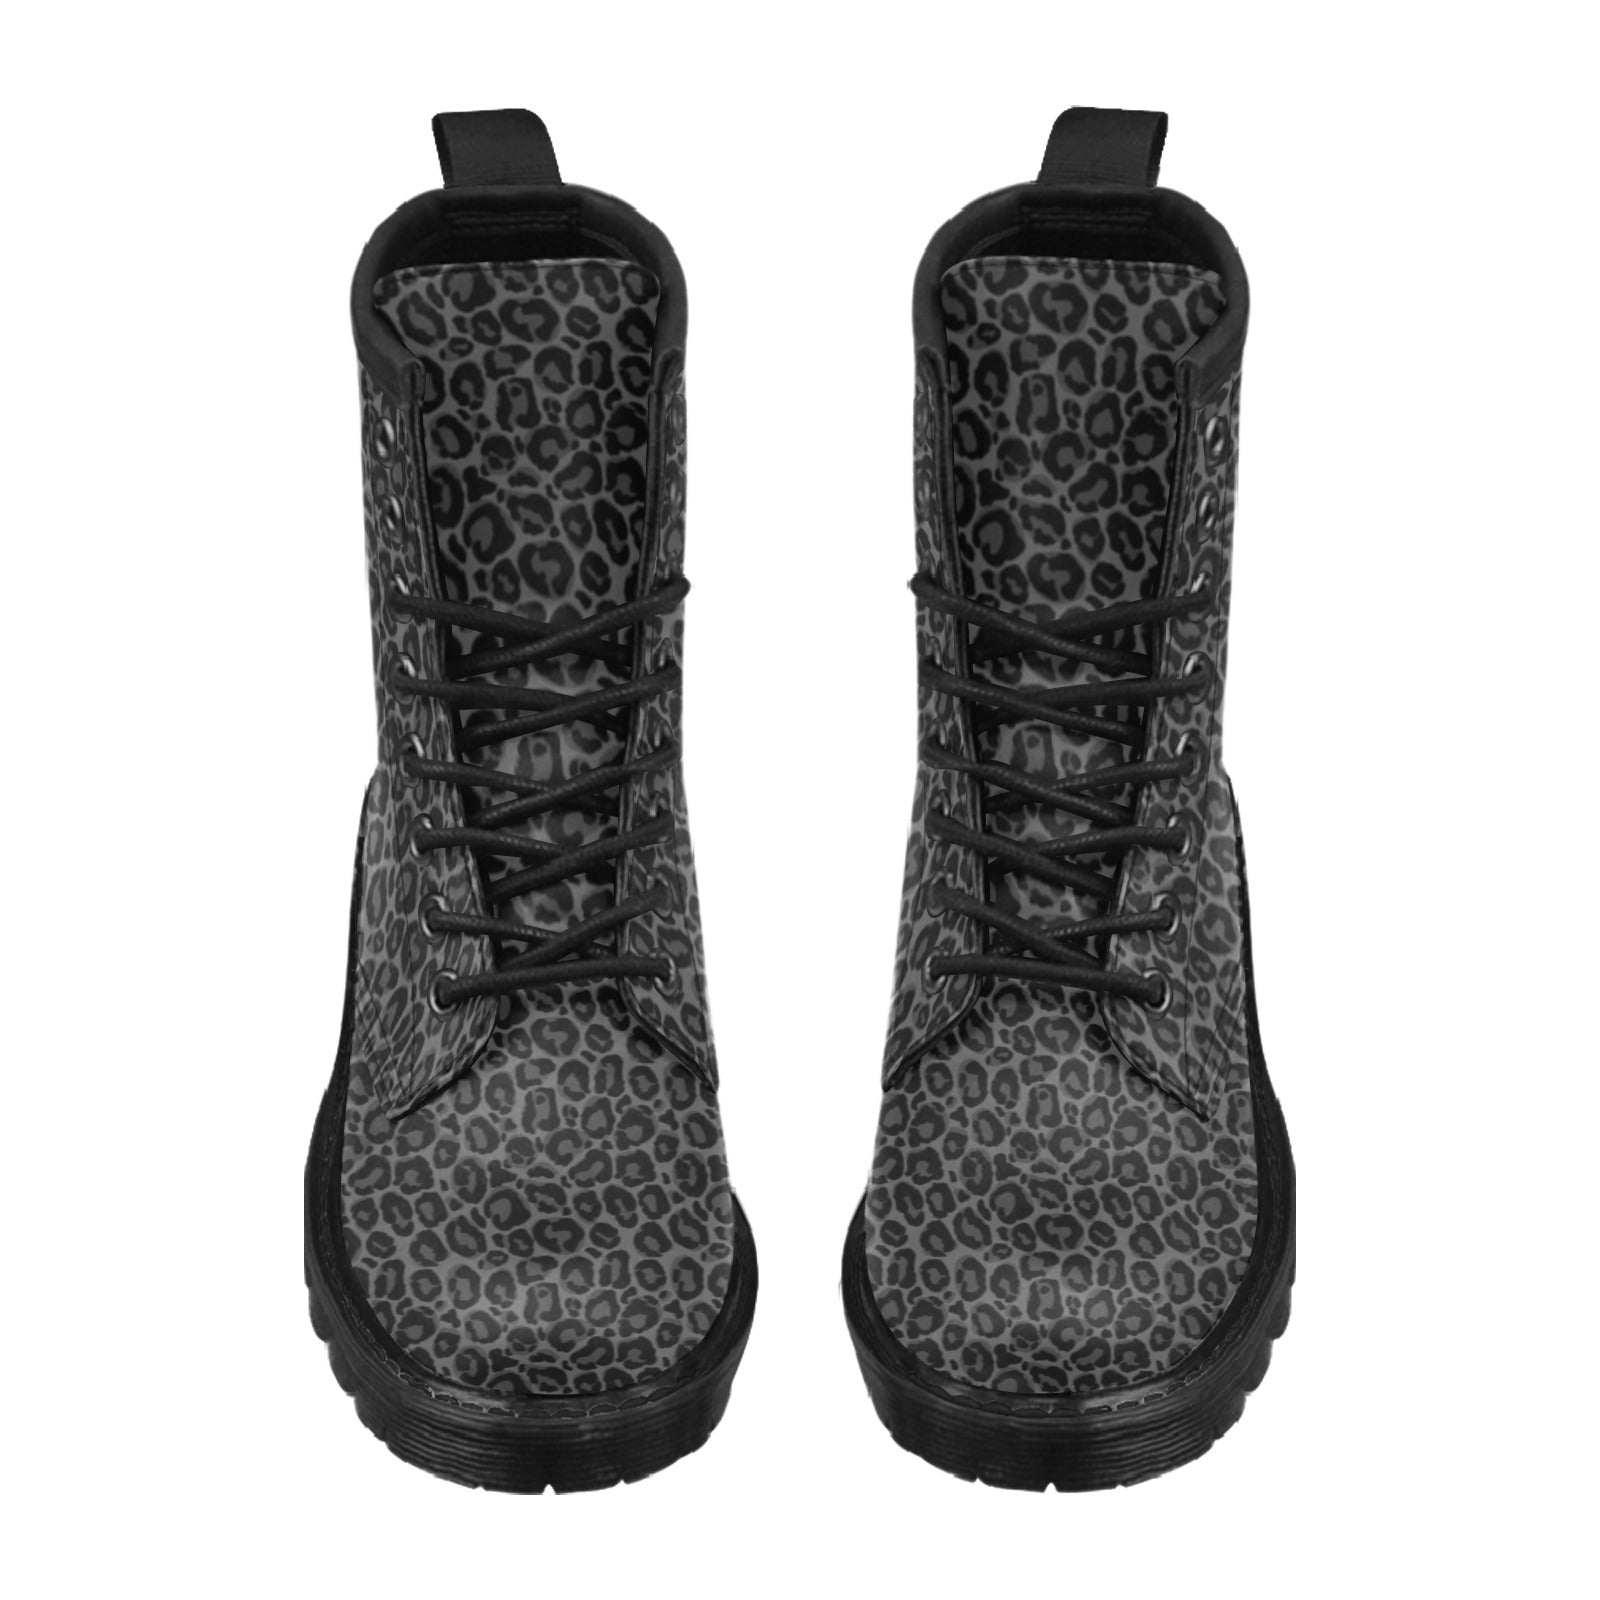 Black Leopard Men Leather Boots, Animal Print Lace Up Shoes Festival Black Ankle Combat Winter Custom Walking Hiking Pull On Designer Starcove Fashion